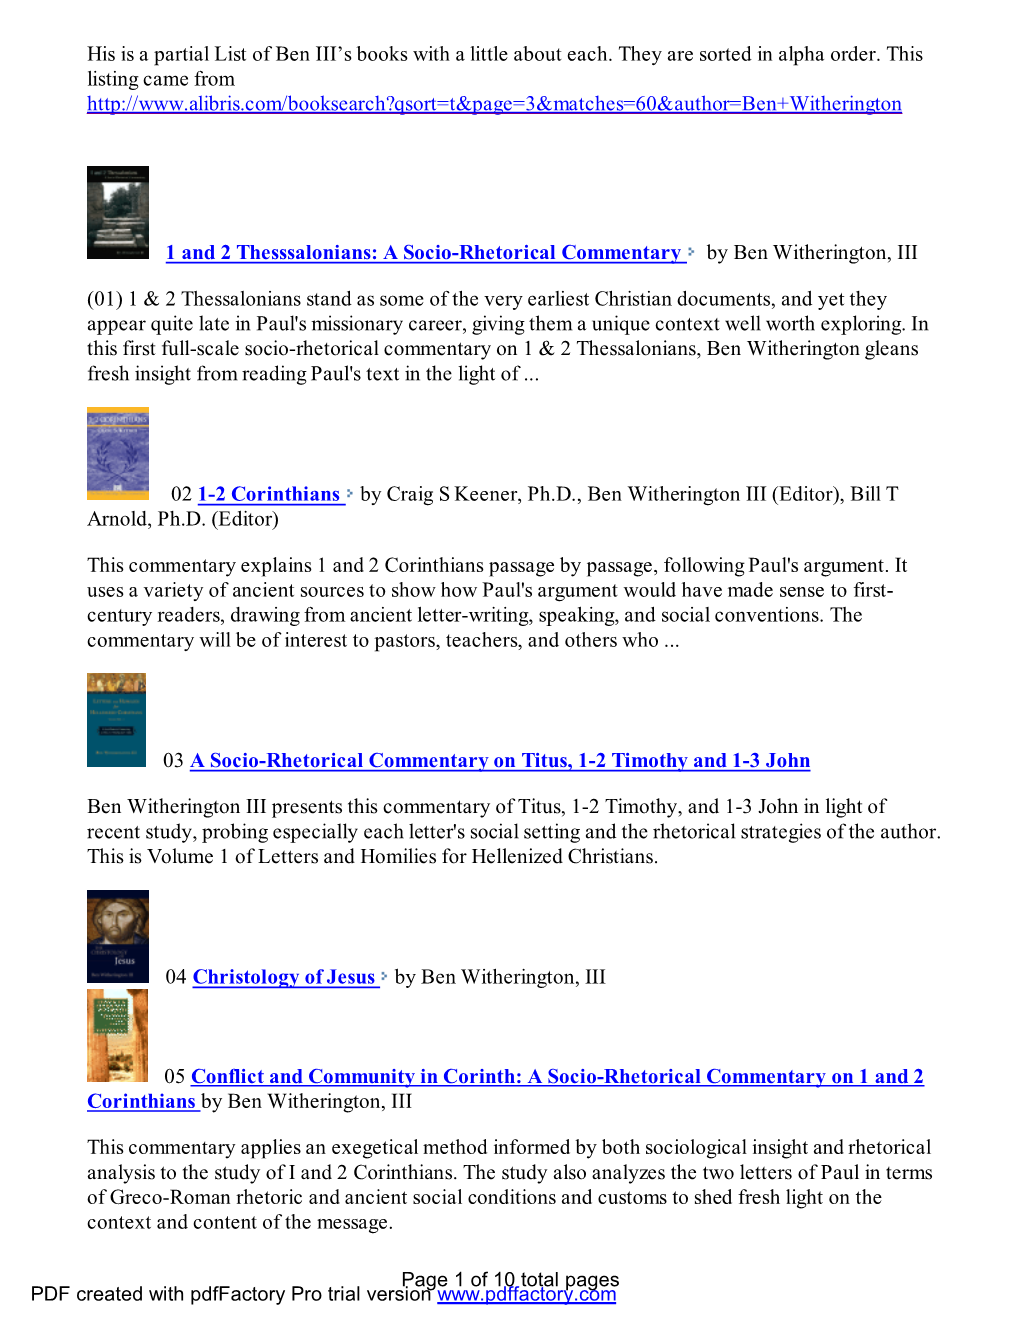 His Is a Partial List of Ben III's Books with a Little About Each. They Are